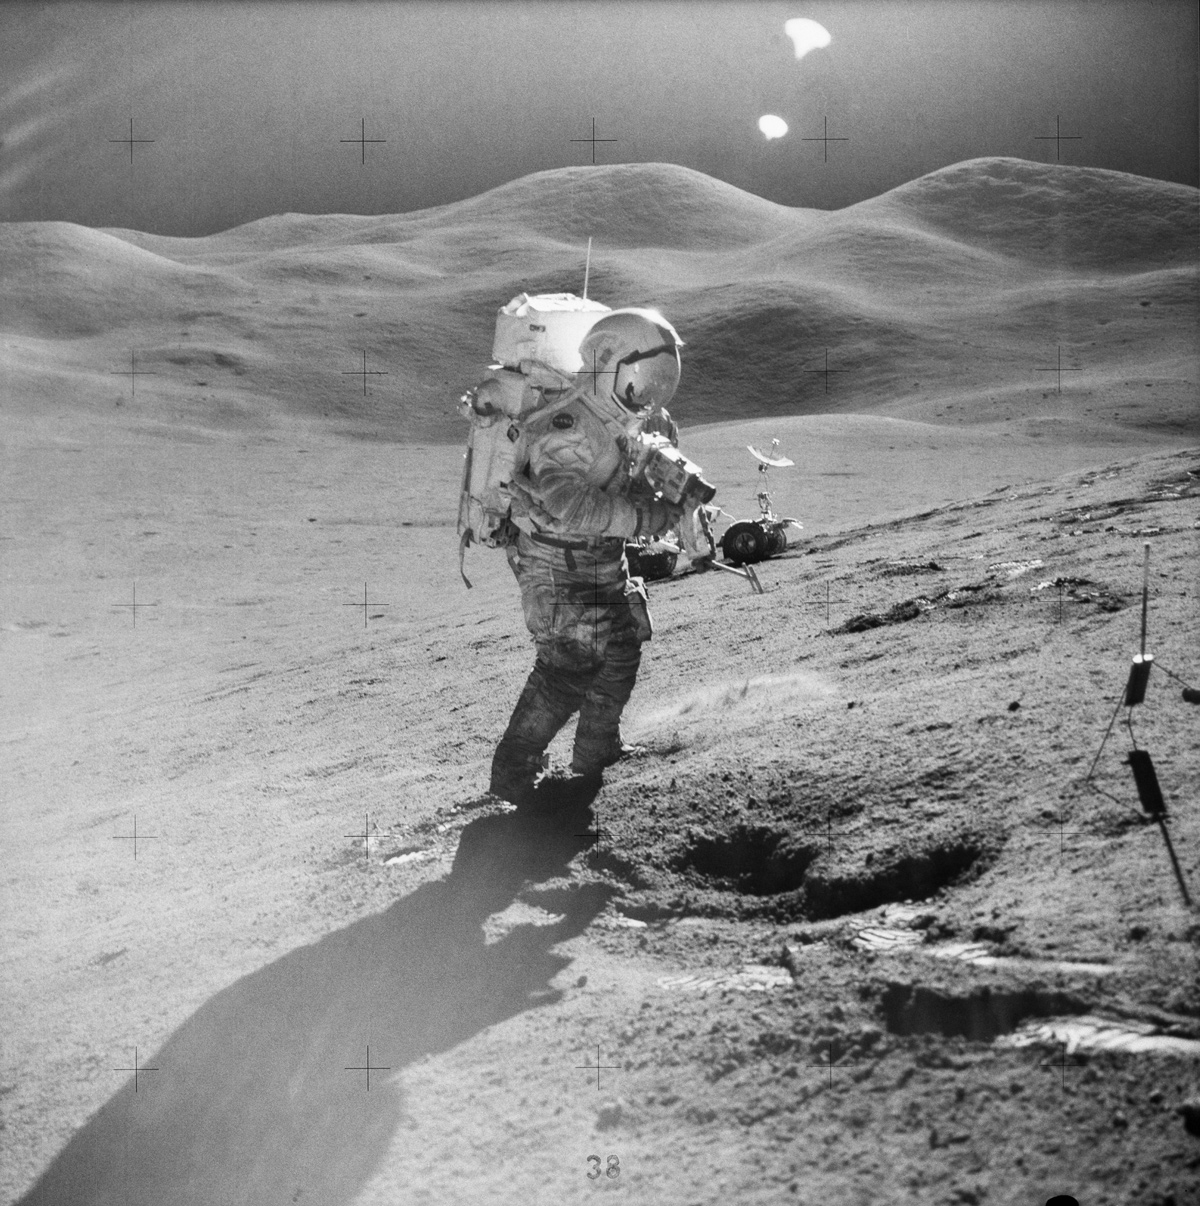 Astronaut photographing the lunar surface